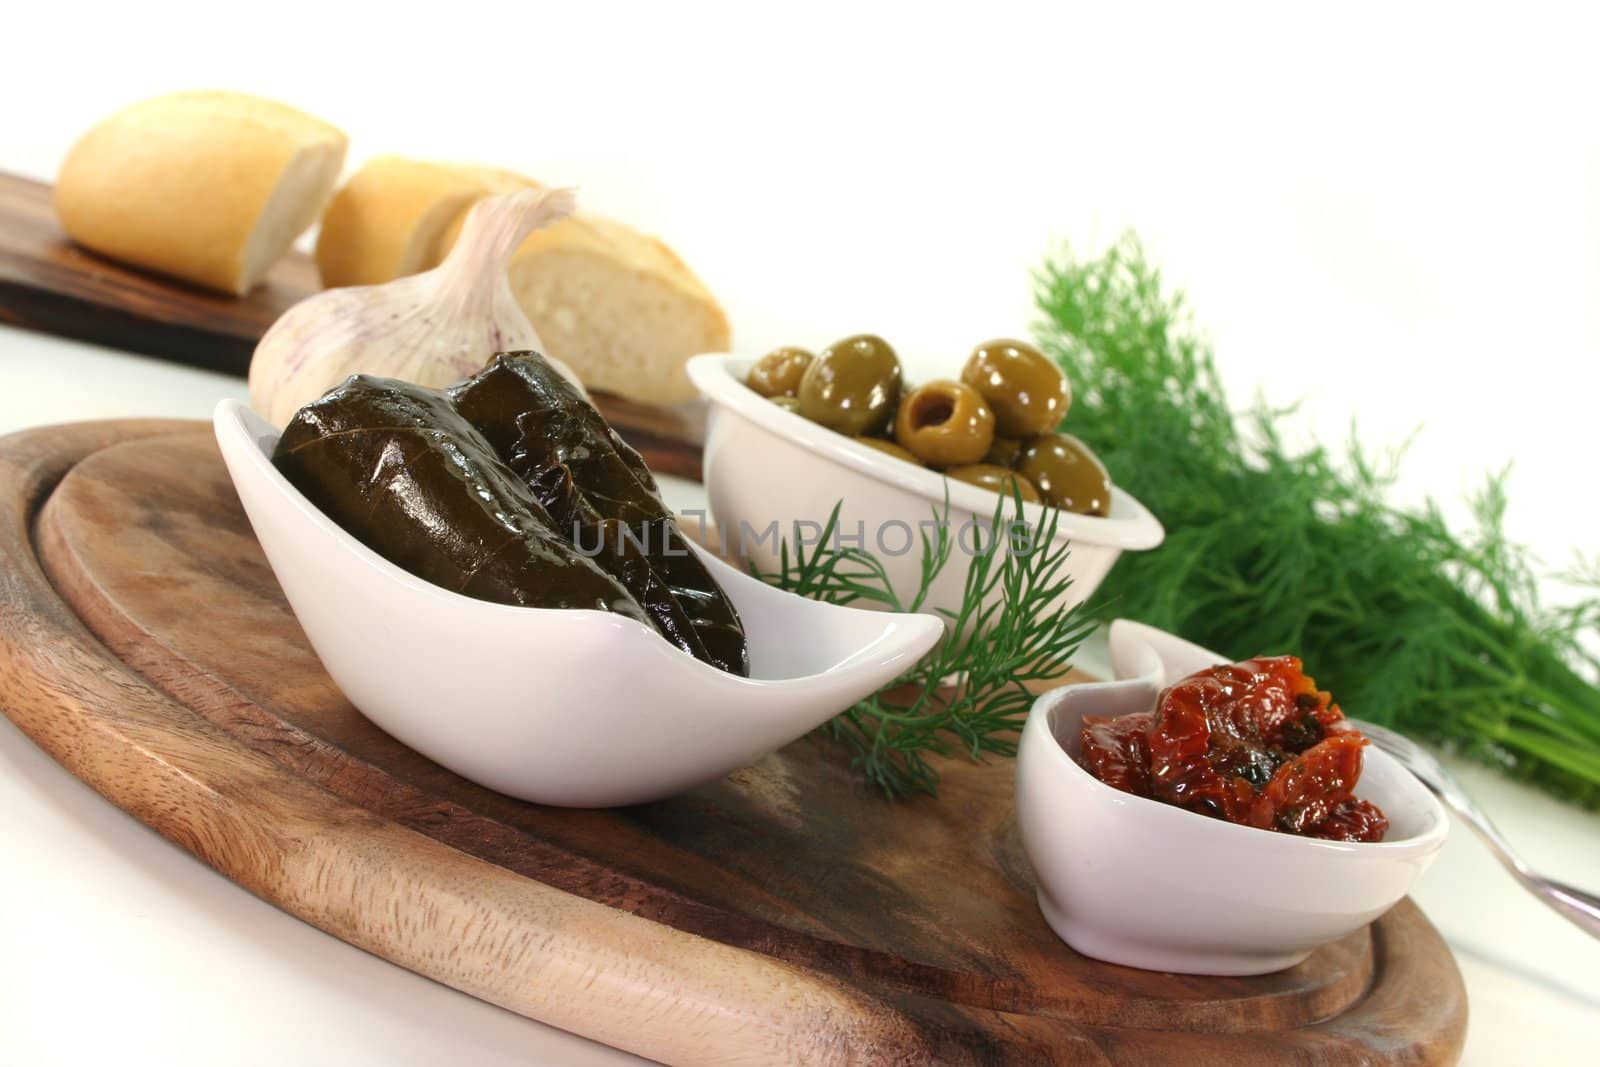 Olives, stuffed vine leaves and dried tomatoes by discovery